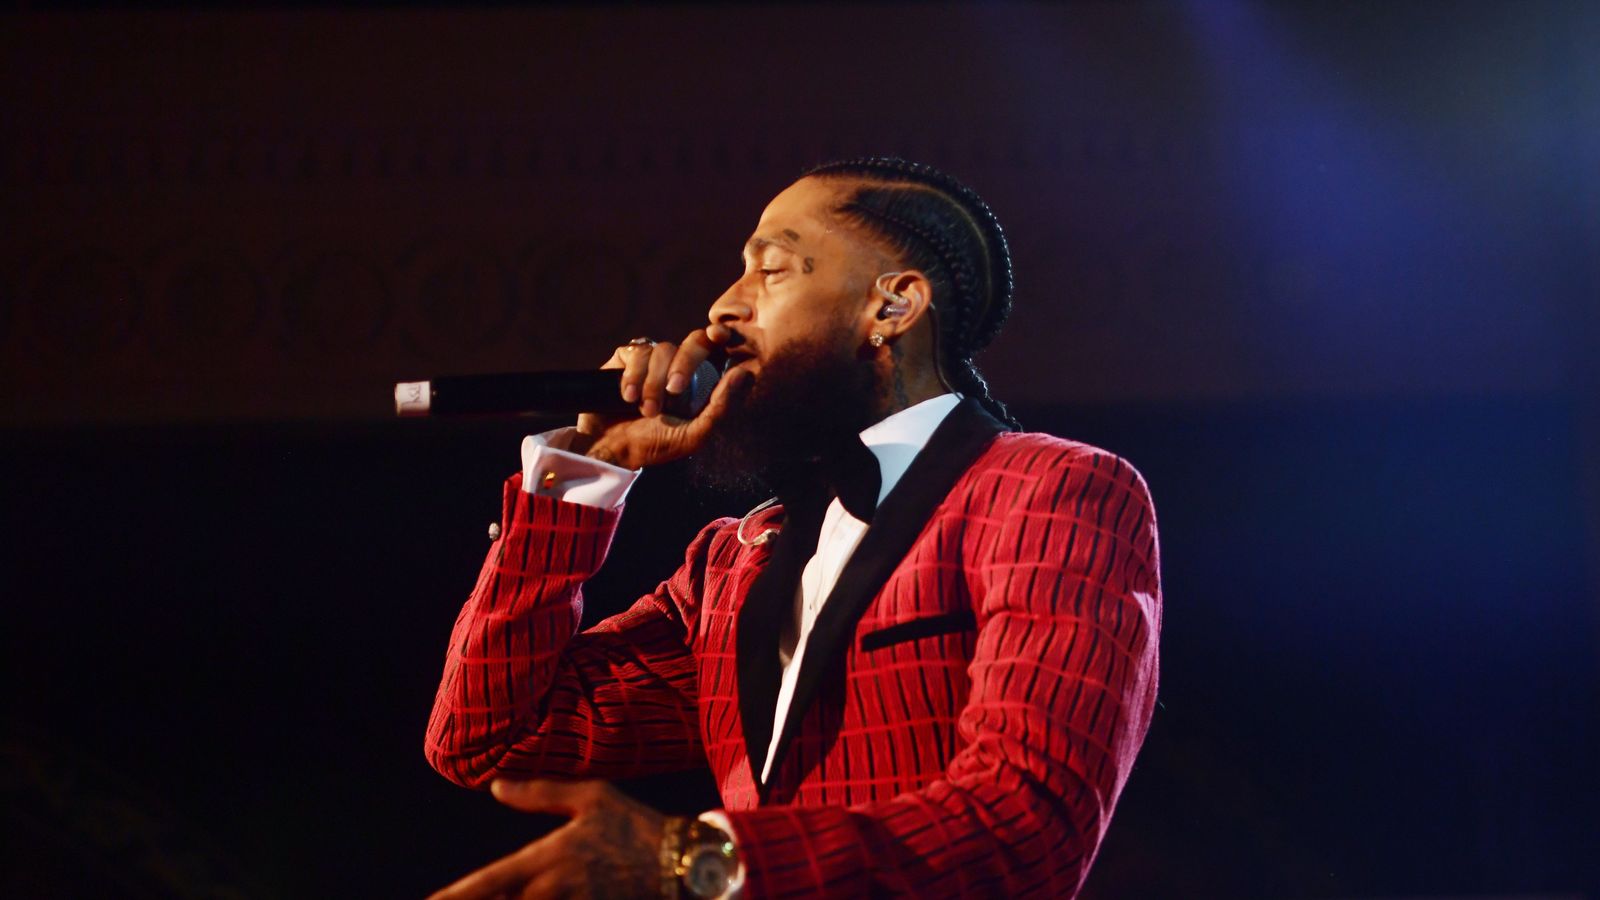 Nipsey Hussle: Man charged with murder of rapper in LA shooting | US News | Sky News